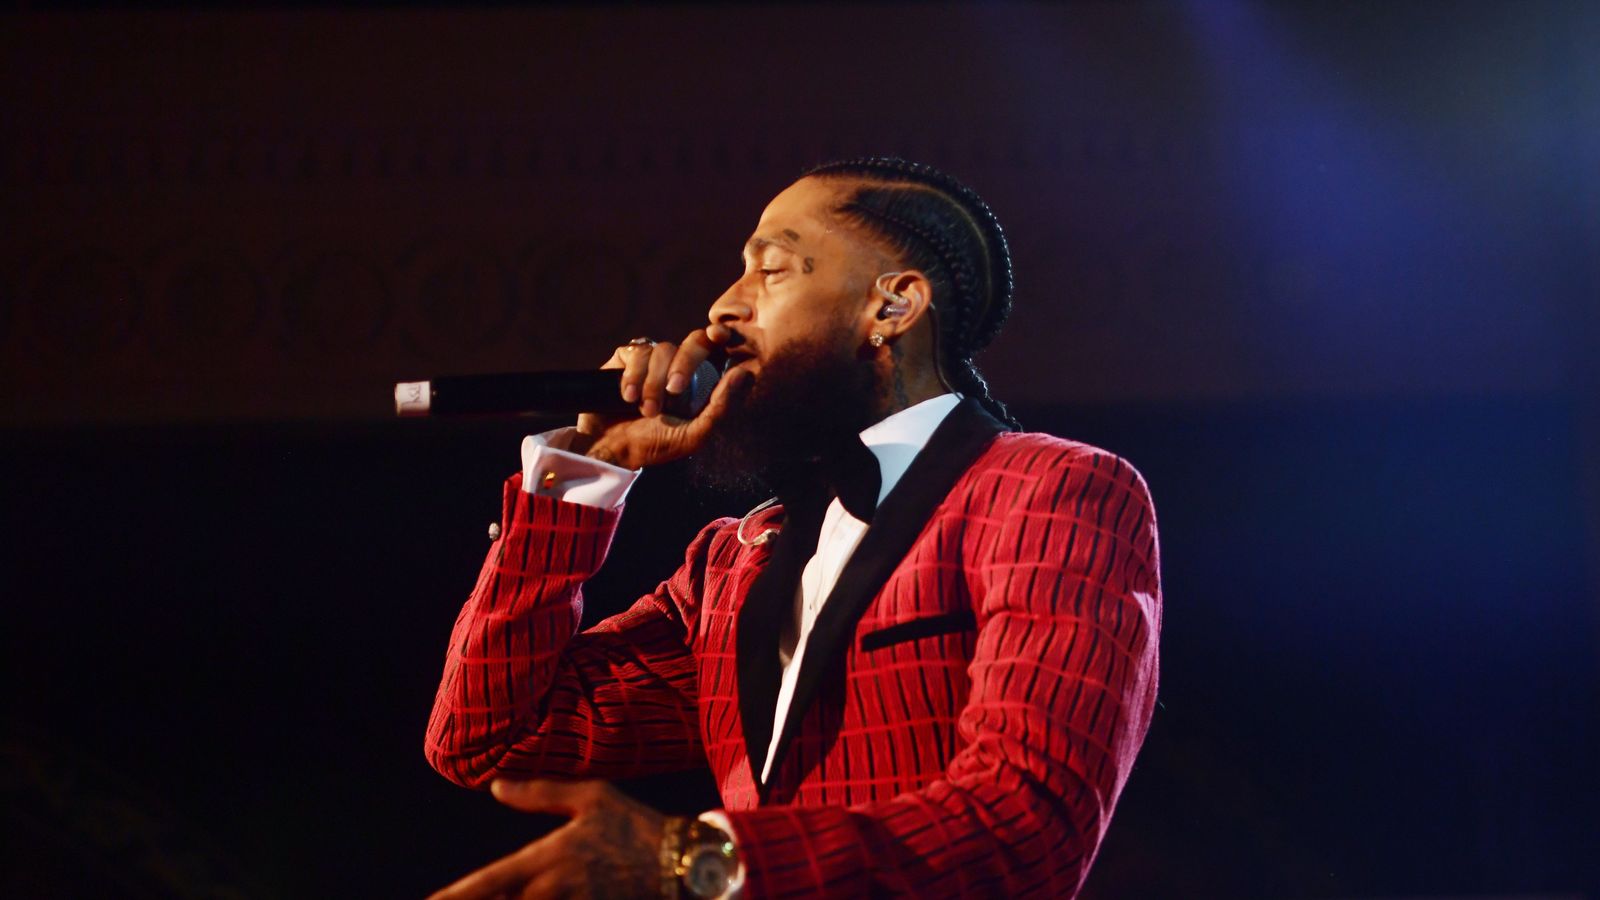 Nipsey Hussle: Man charged with murder of rapper in LA shooting | US News | Sky News